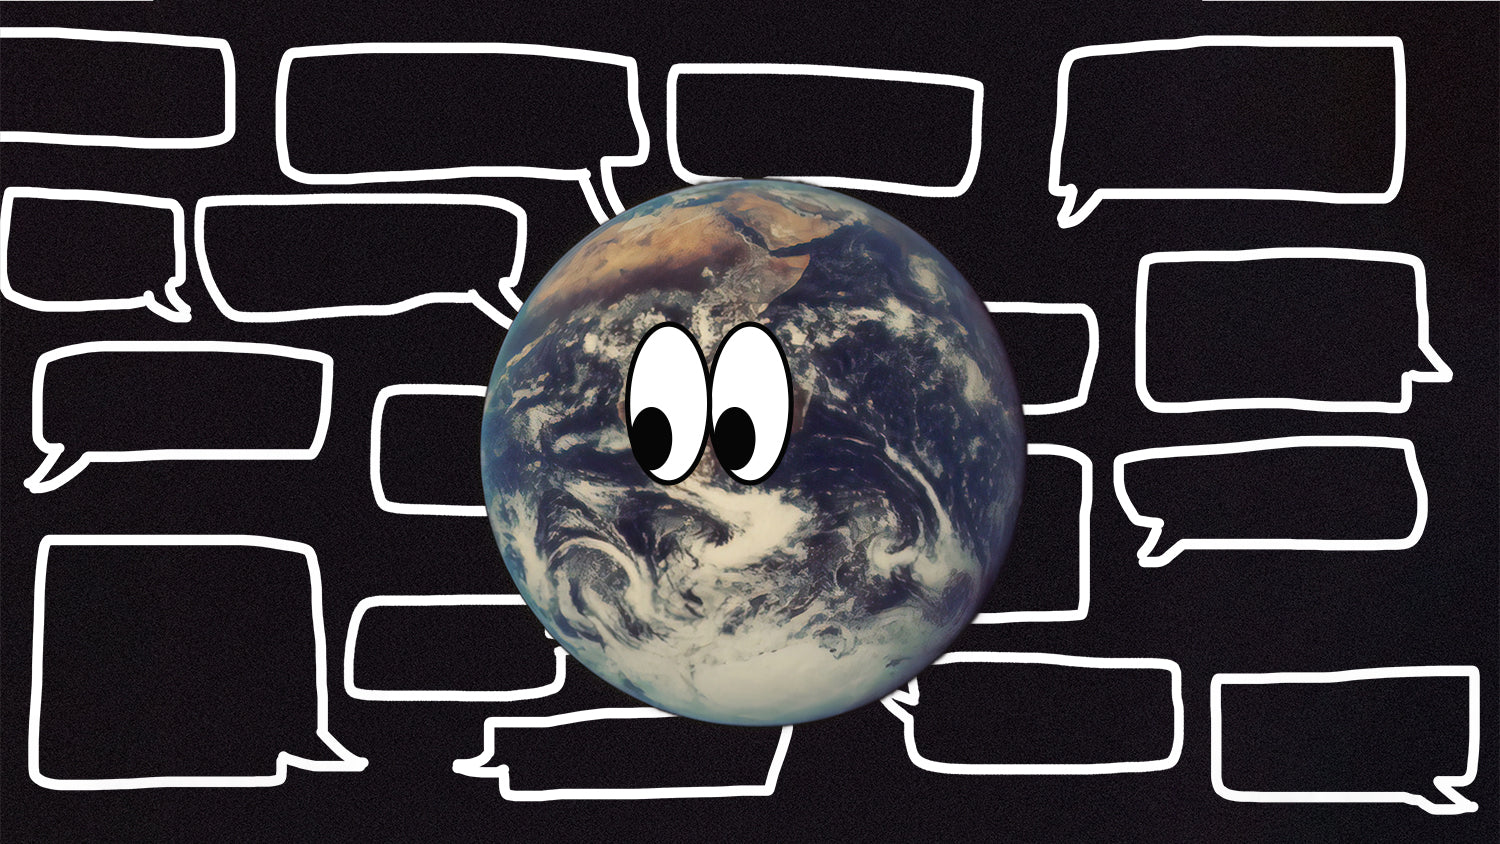 A photograph of Earth with eyes on a background of speech bubbles.